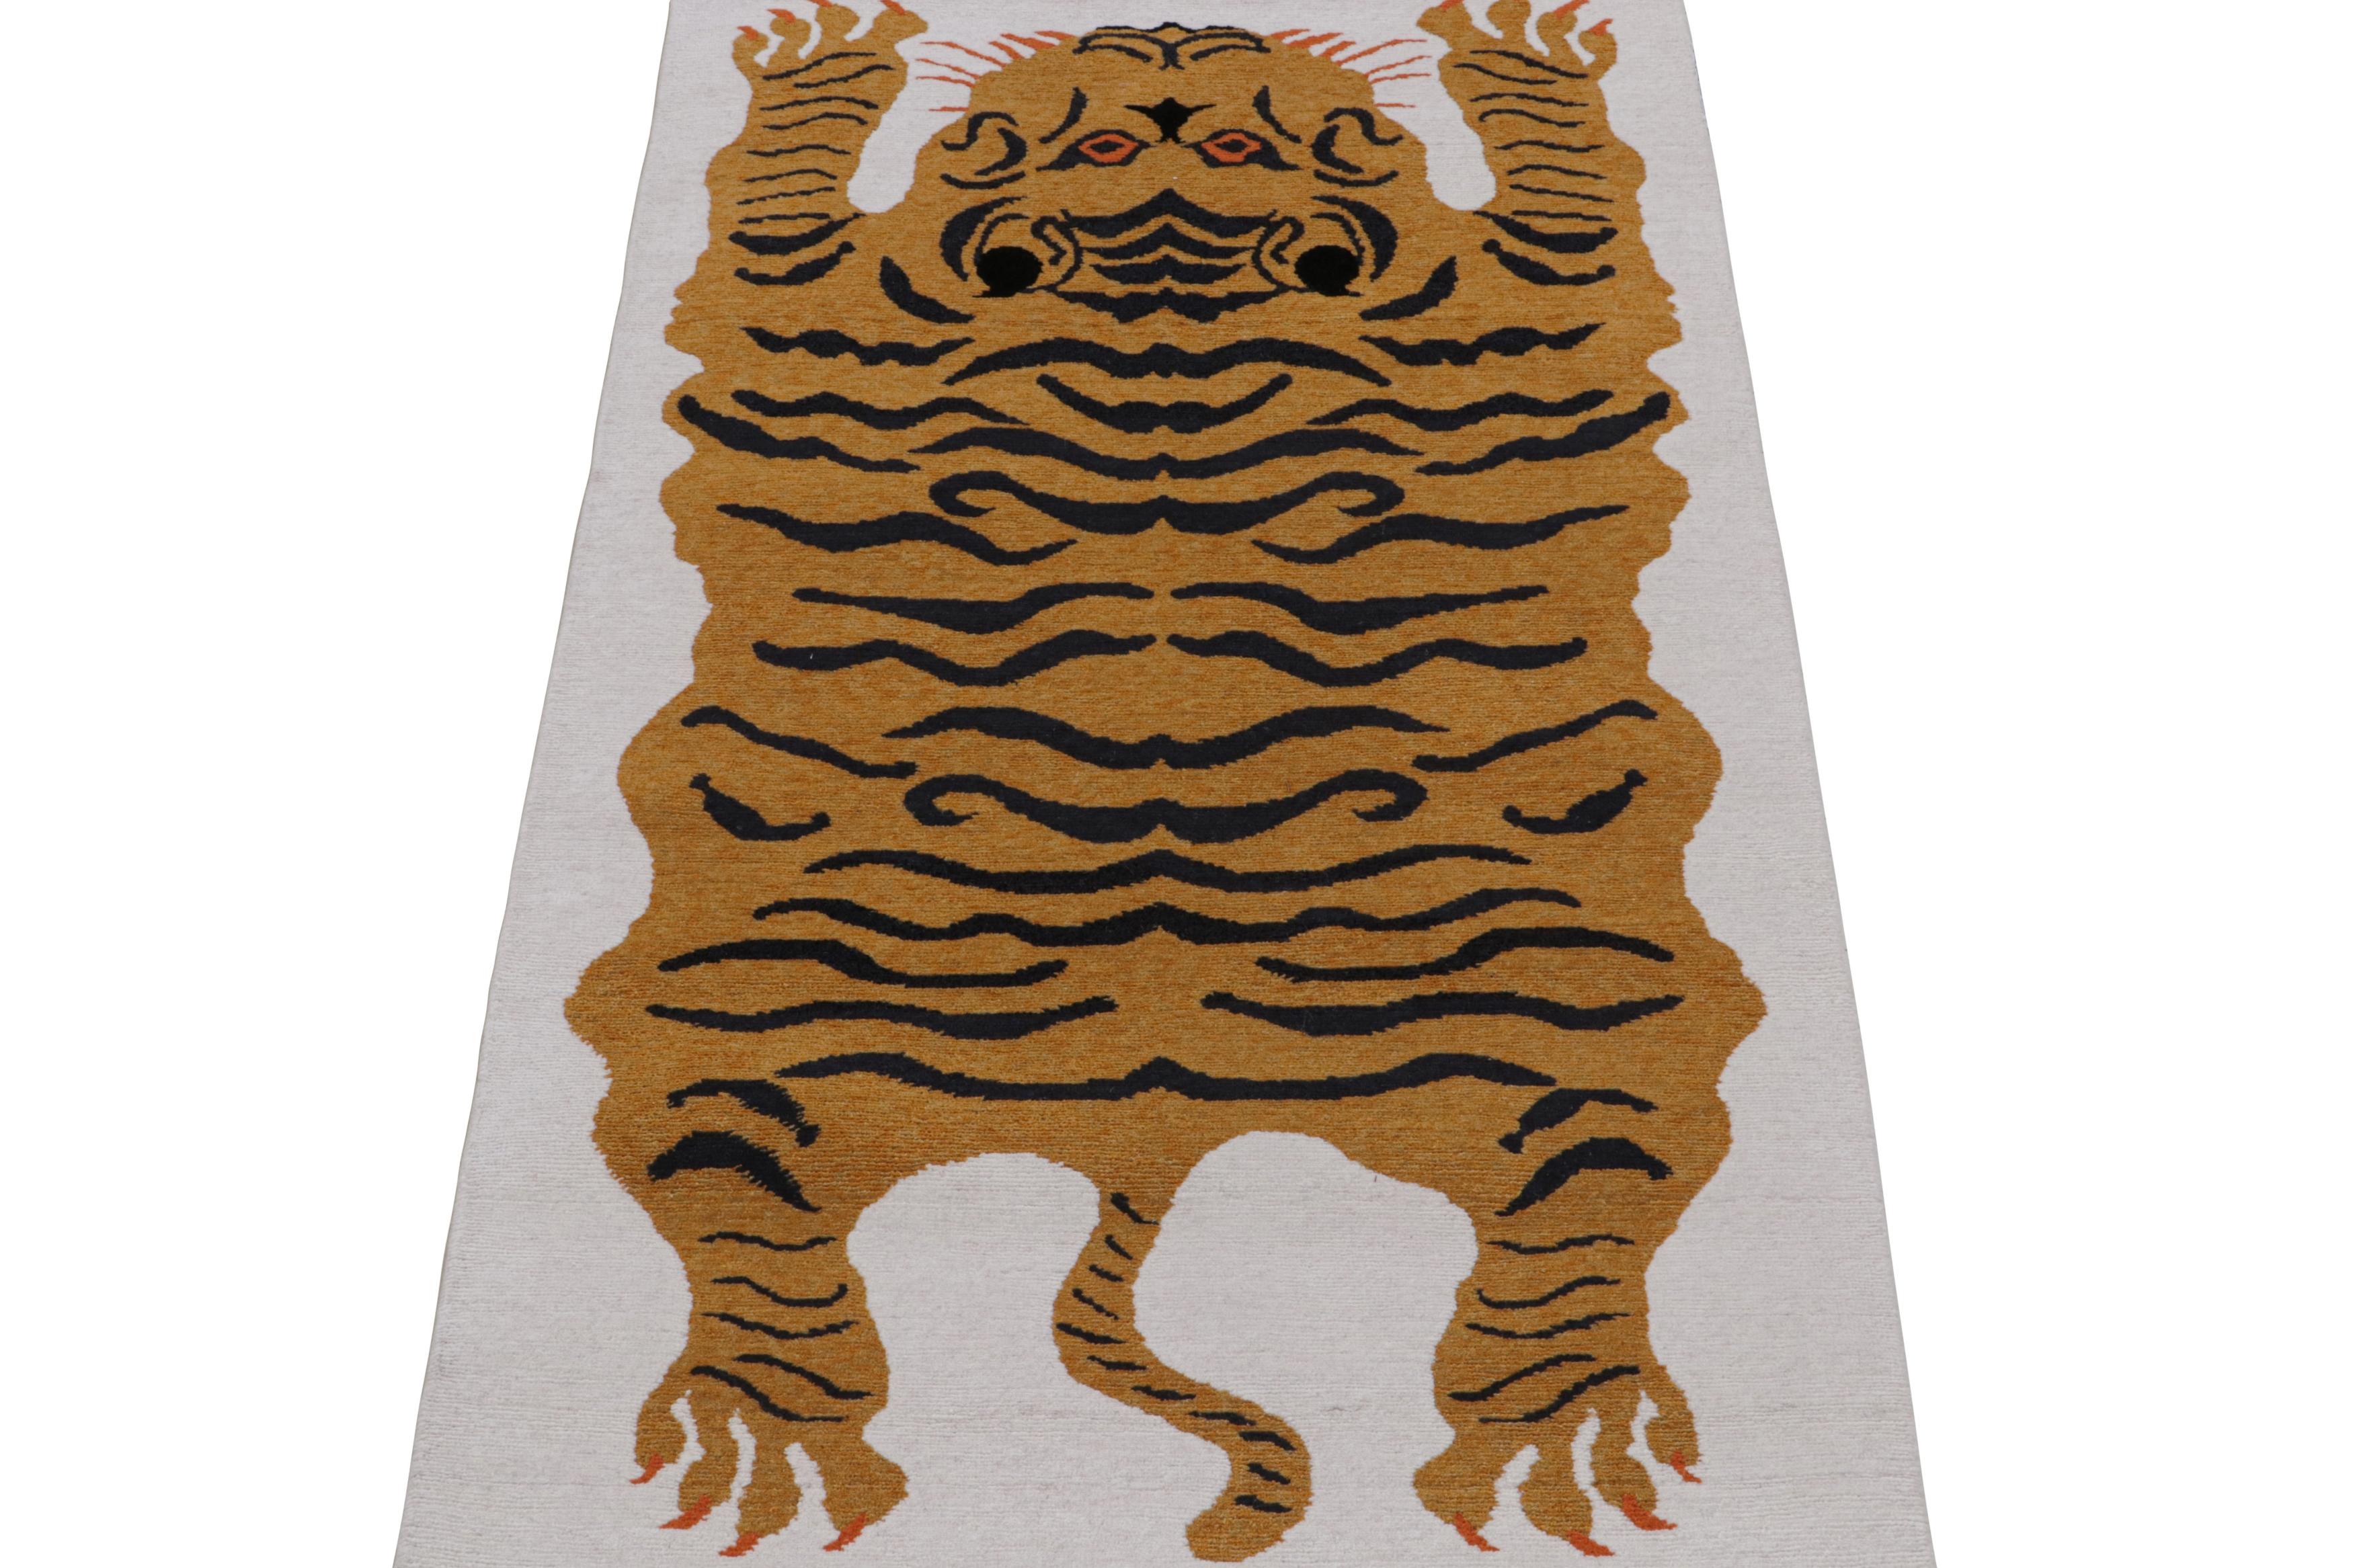 Nepalese Rug & Kilim’s Tiger-Skin Rug in White with Gold & Black Pictorial For Sale